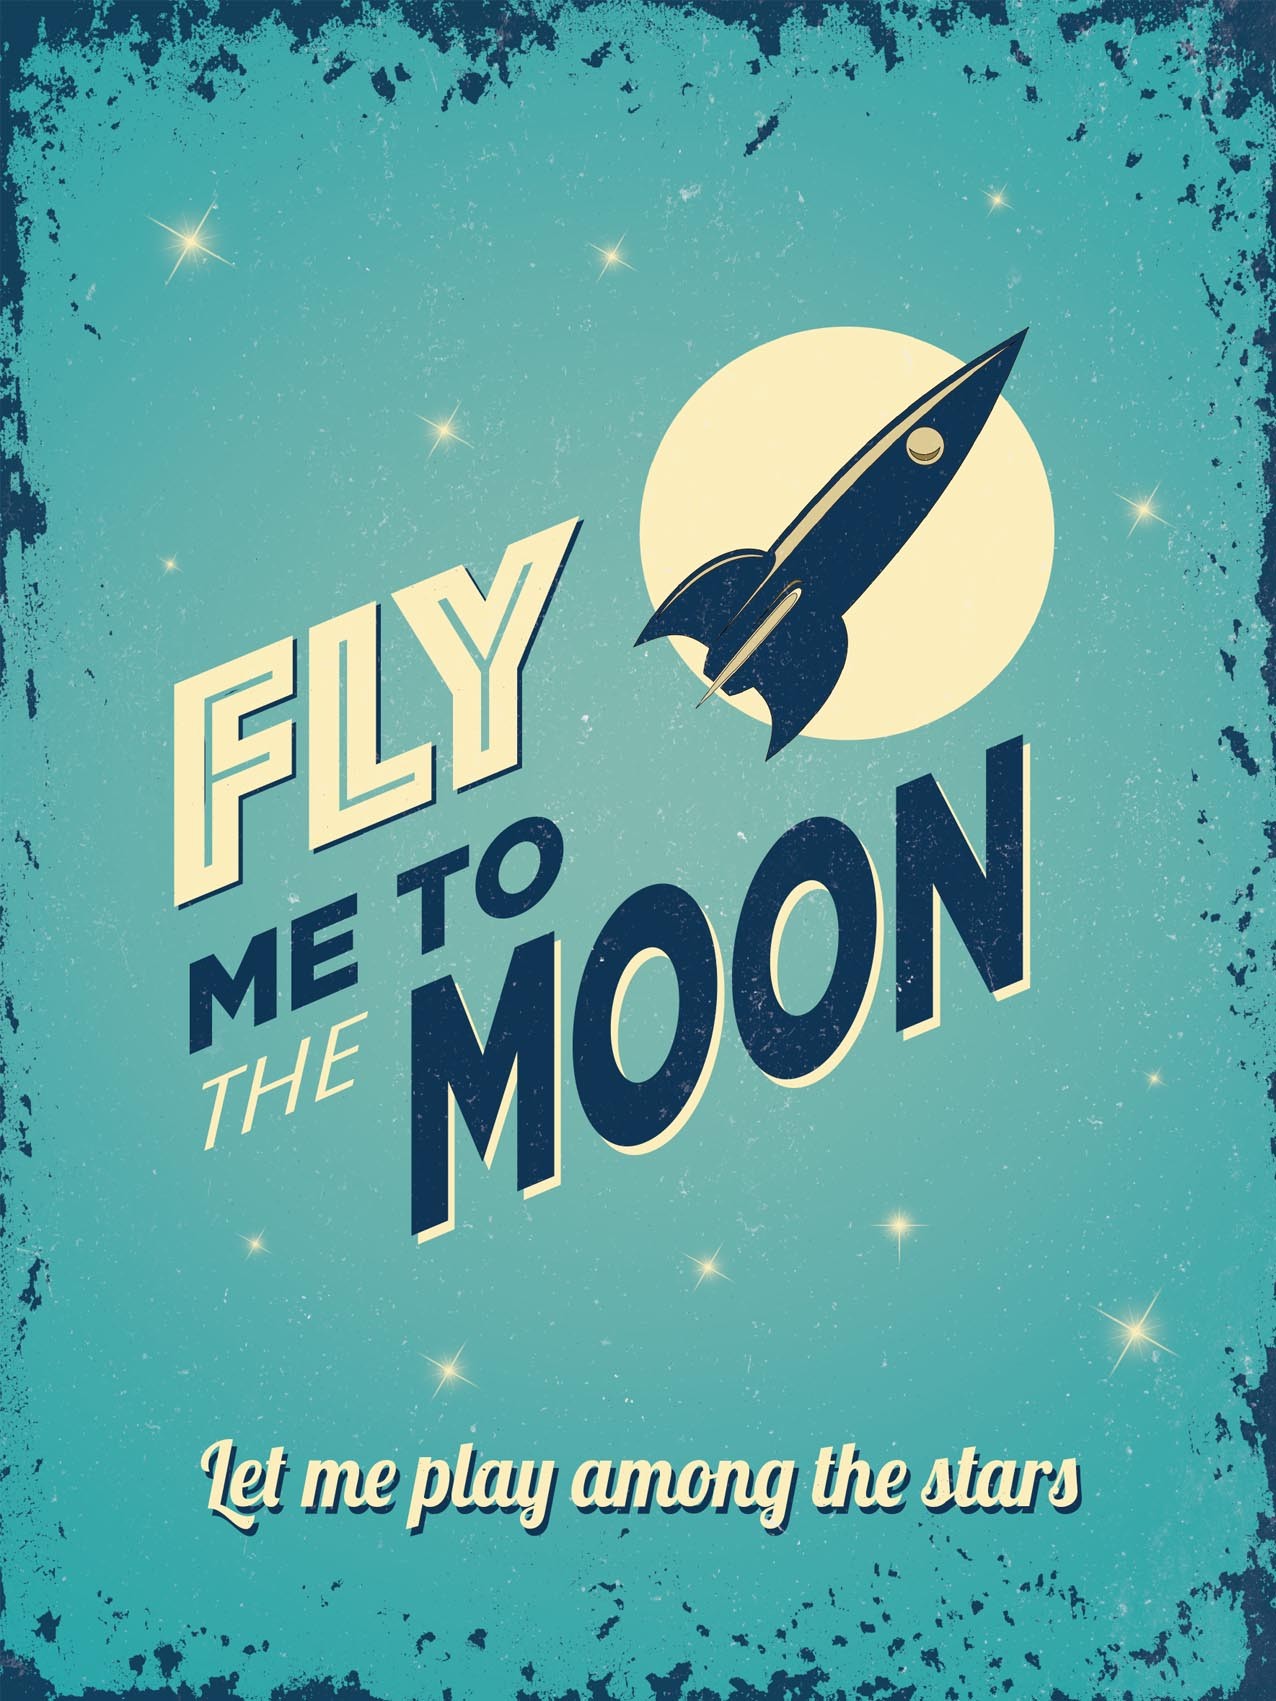 Fly Me To The Moon HD wallpapers, Desktop wallpaper - most viewed